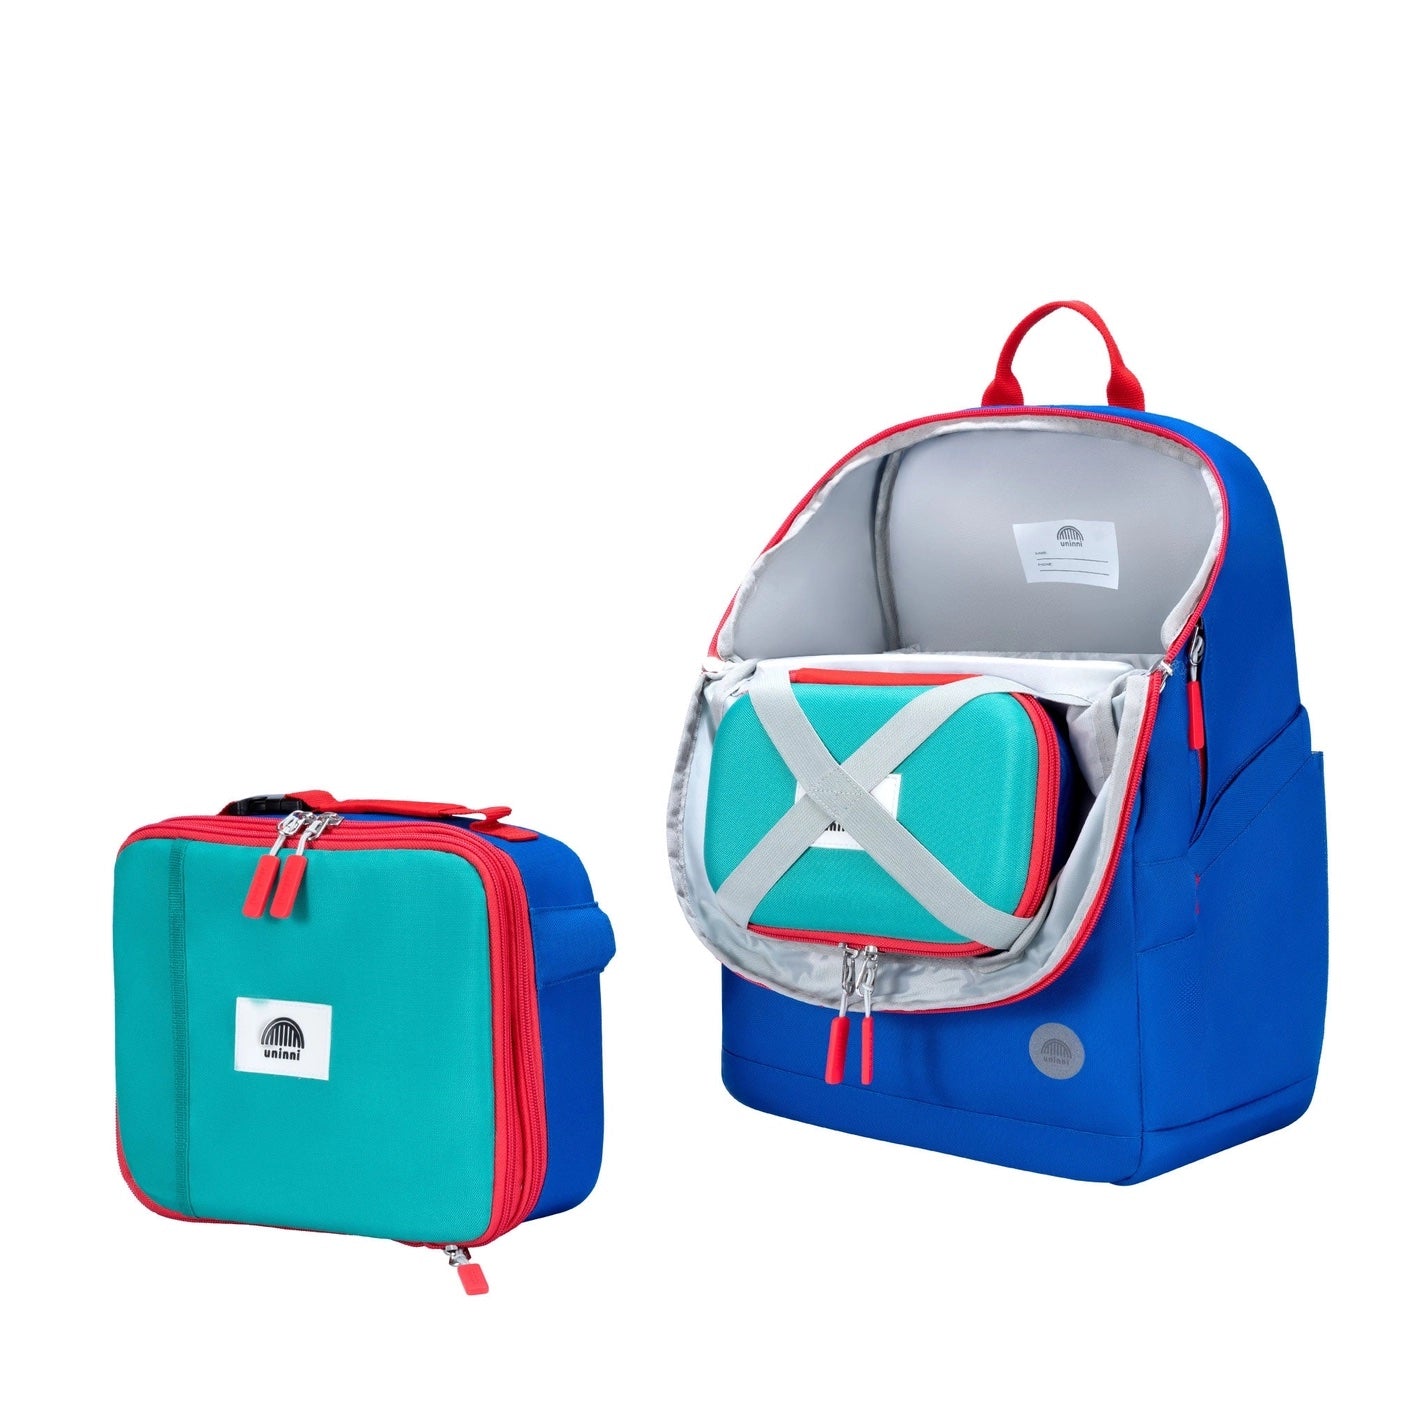 Uninni Bailey Backpack - Blue Color Block